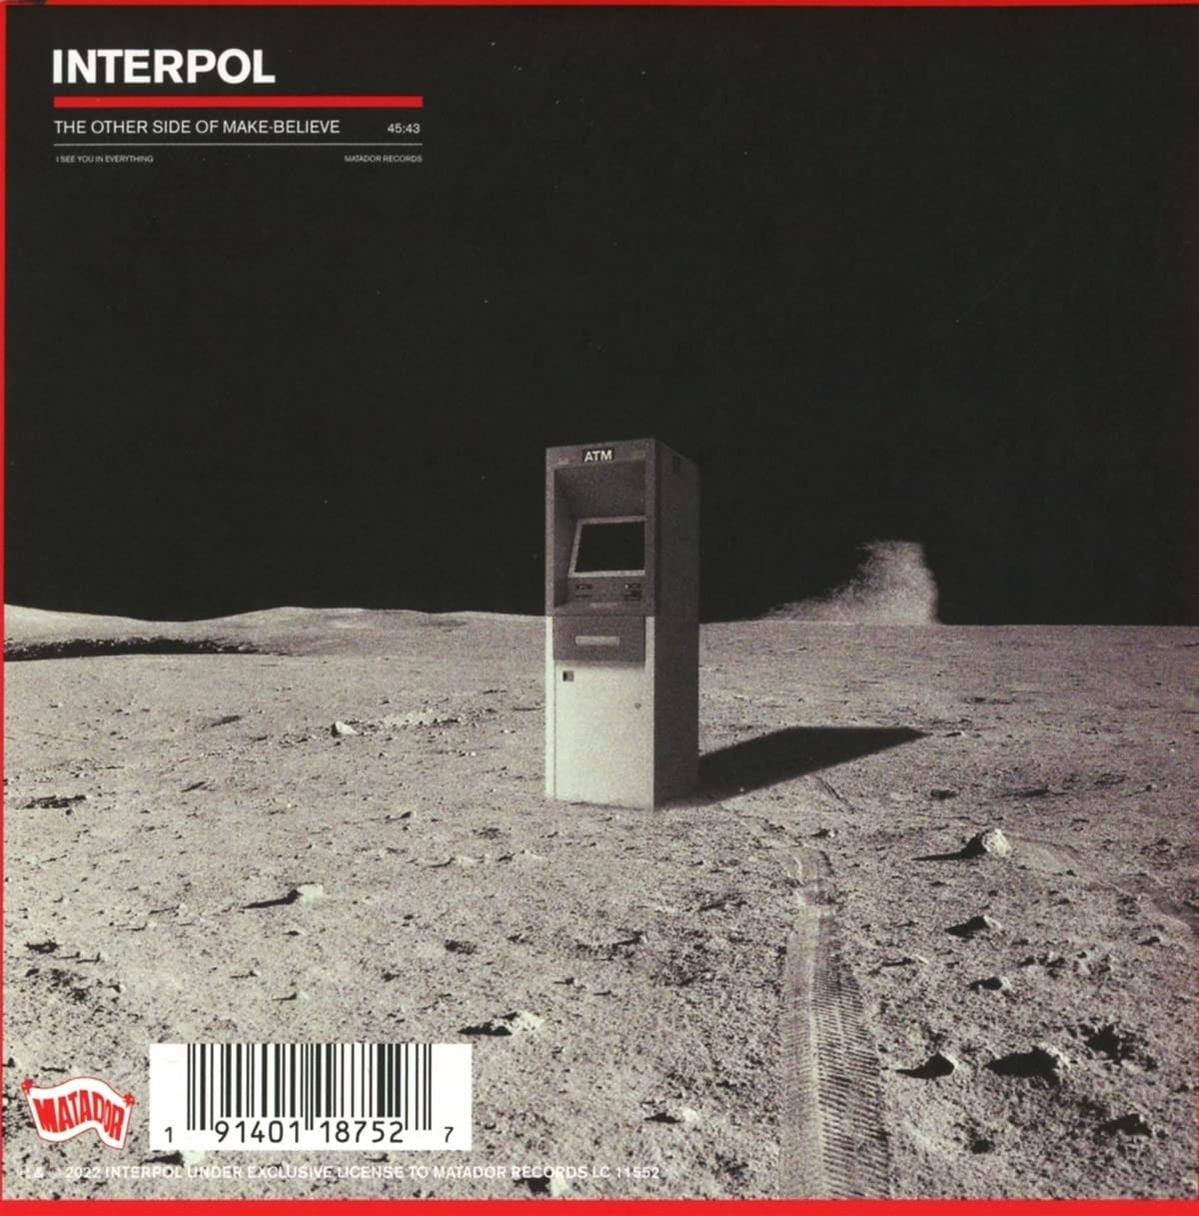 - The of Make Other - Side (CD) Interpol Believe